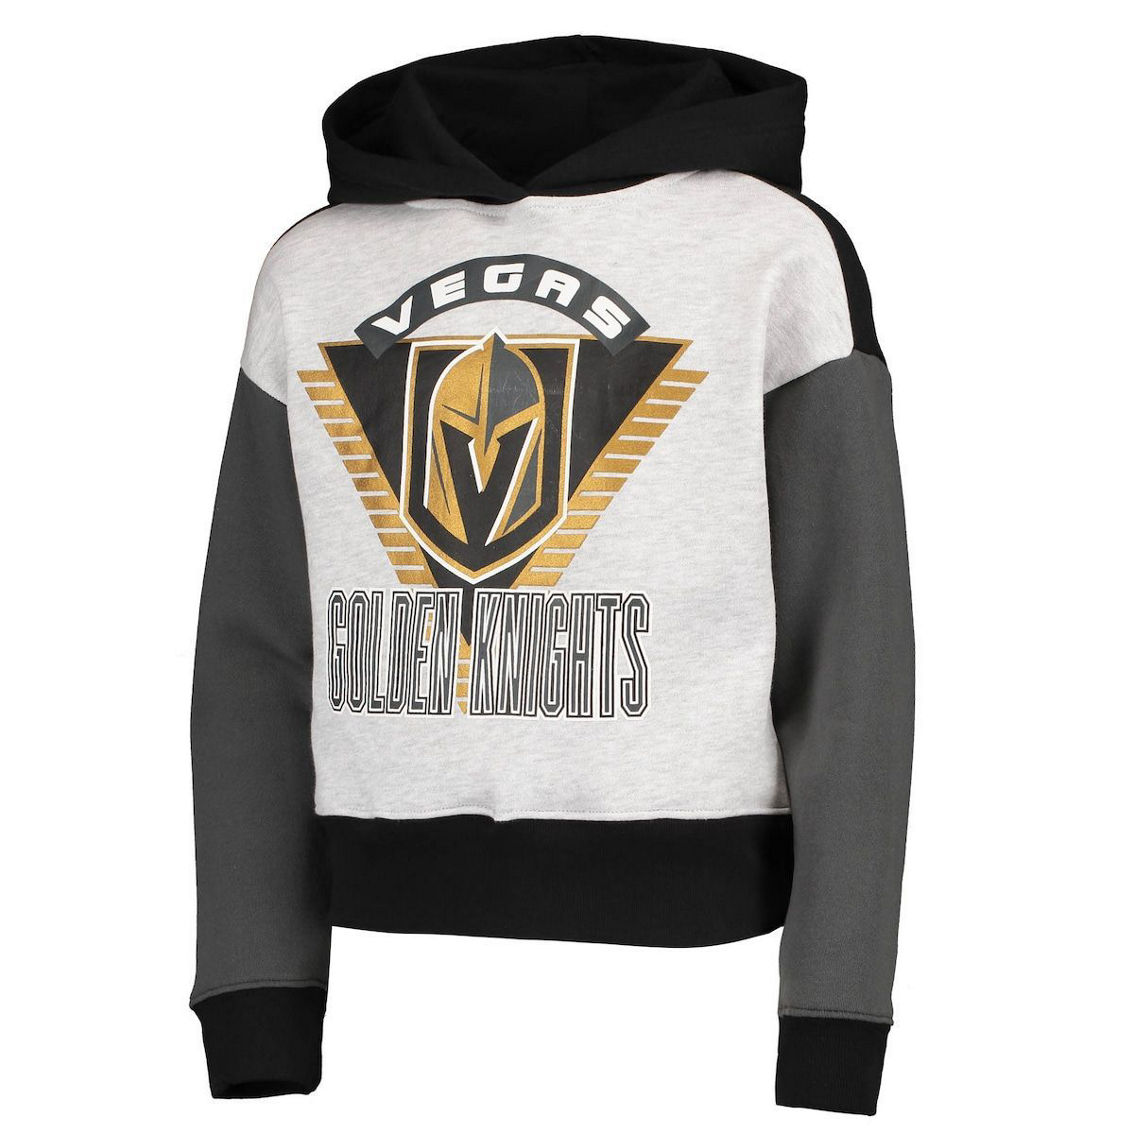 Outerstuff Girls Youth Black Vegas Golden Knights Let's Get Loud Pullover Hoodie - Image 3 of 4